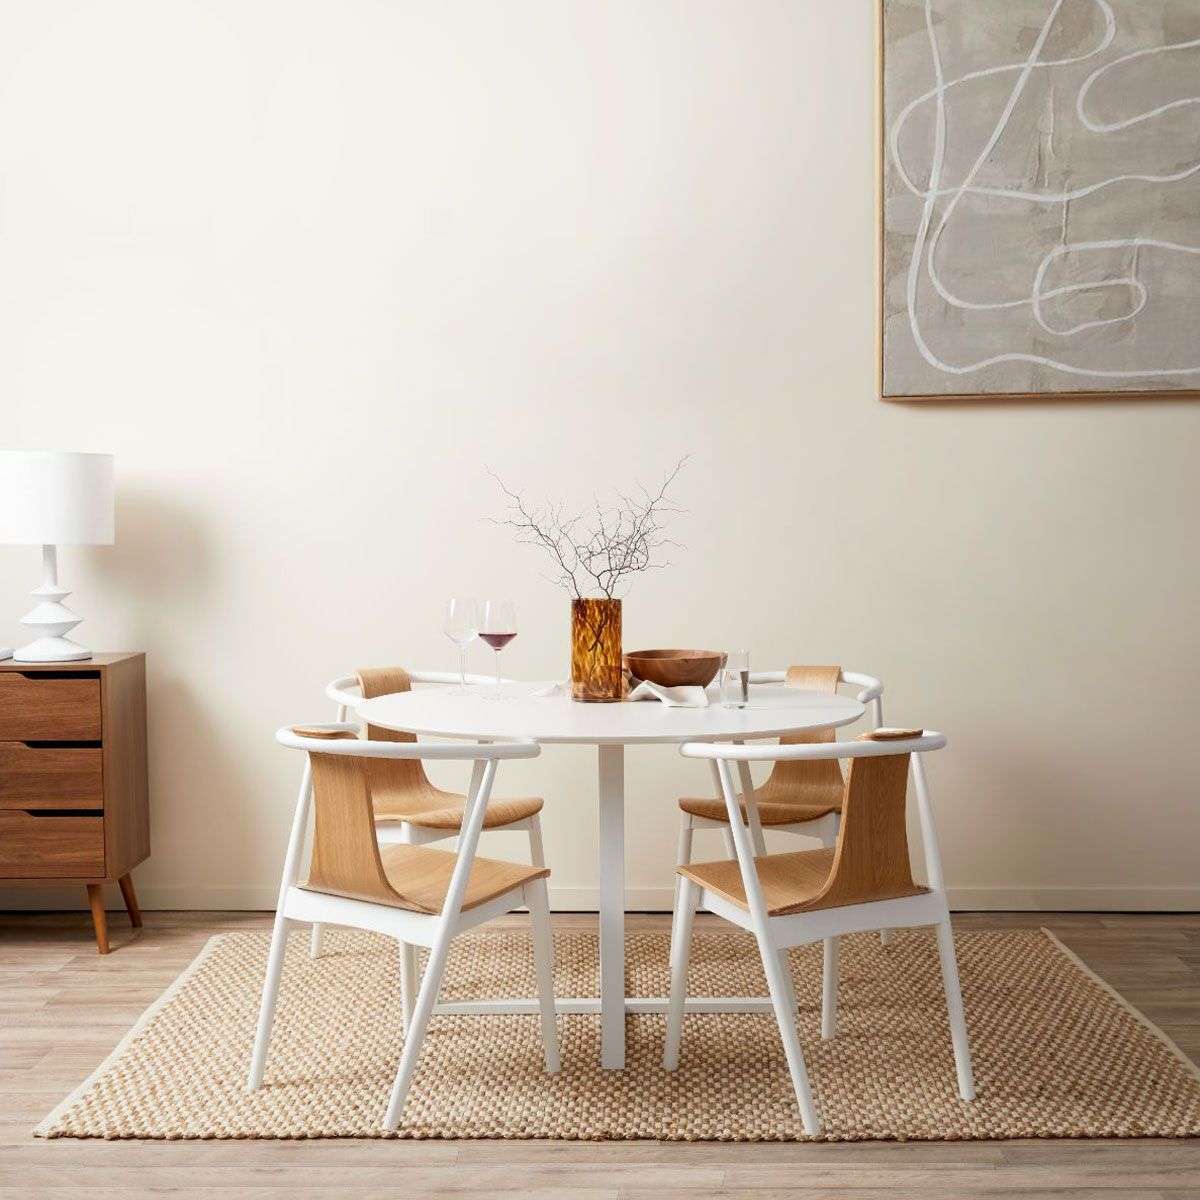 Zander 4 Seater Round Dining Table - White